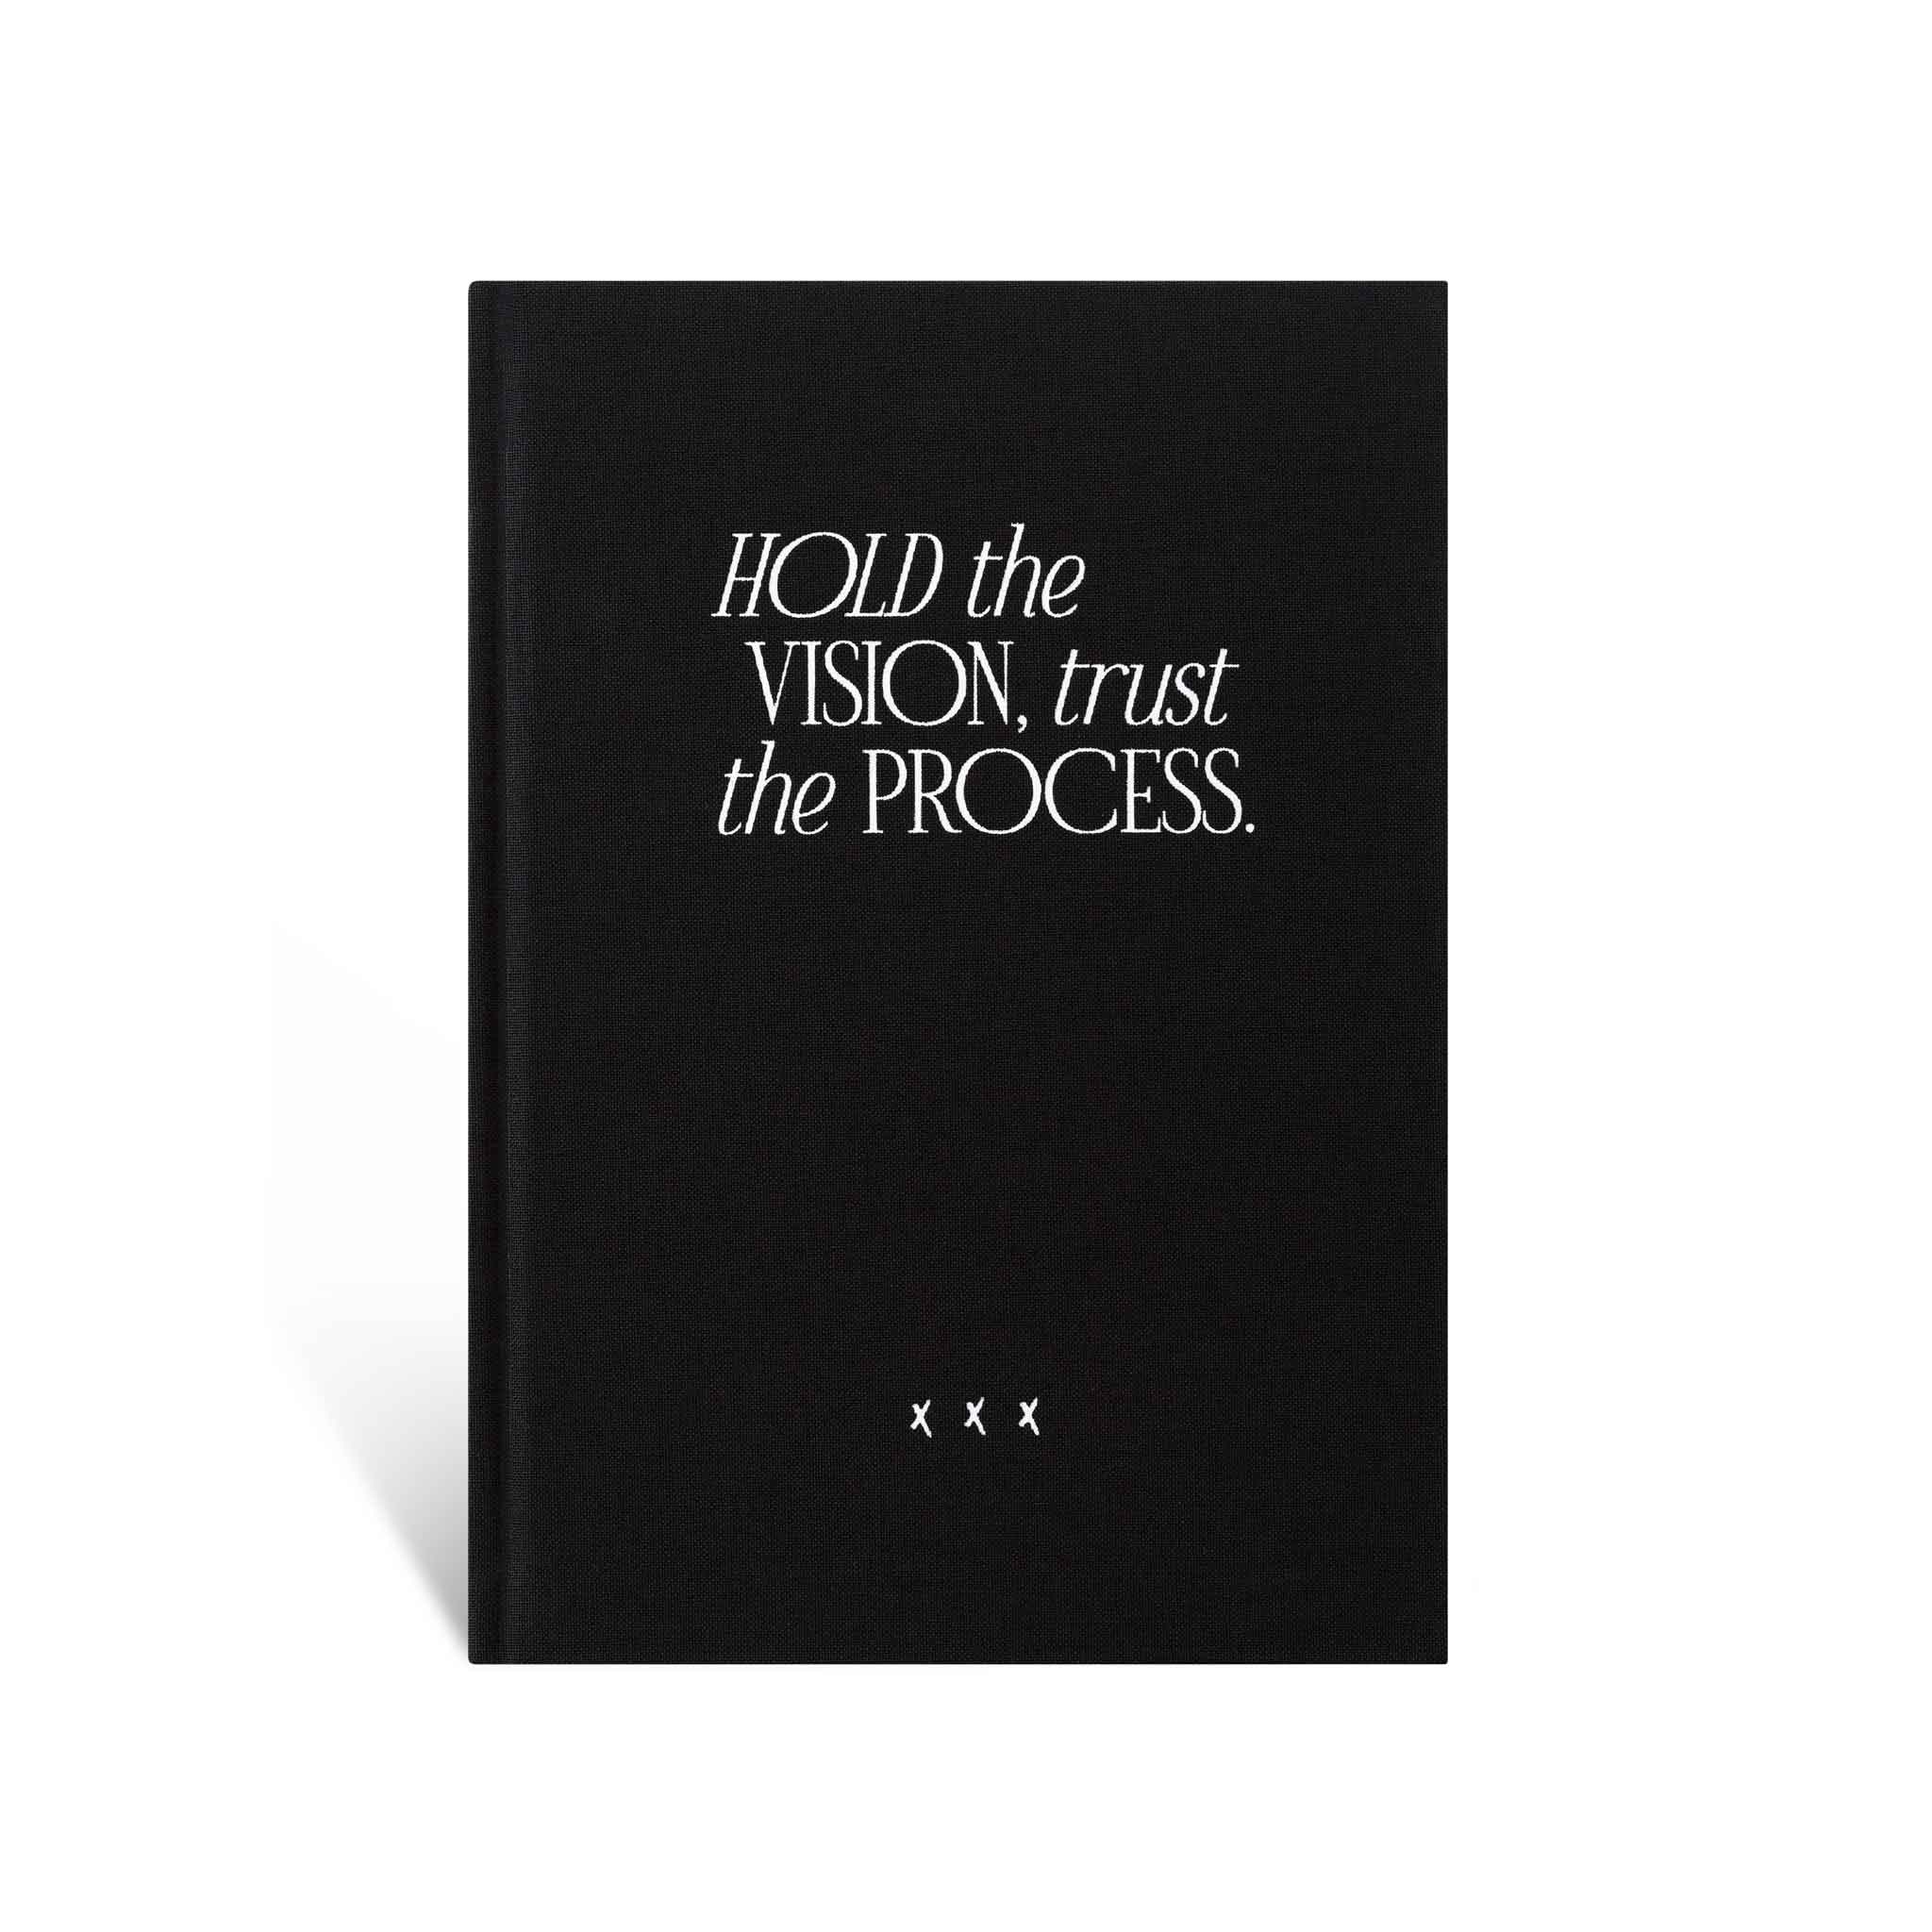 Notebook "Hold the Vision", A5, black / white, linen